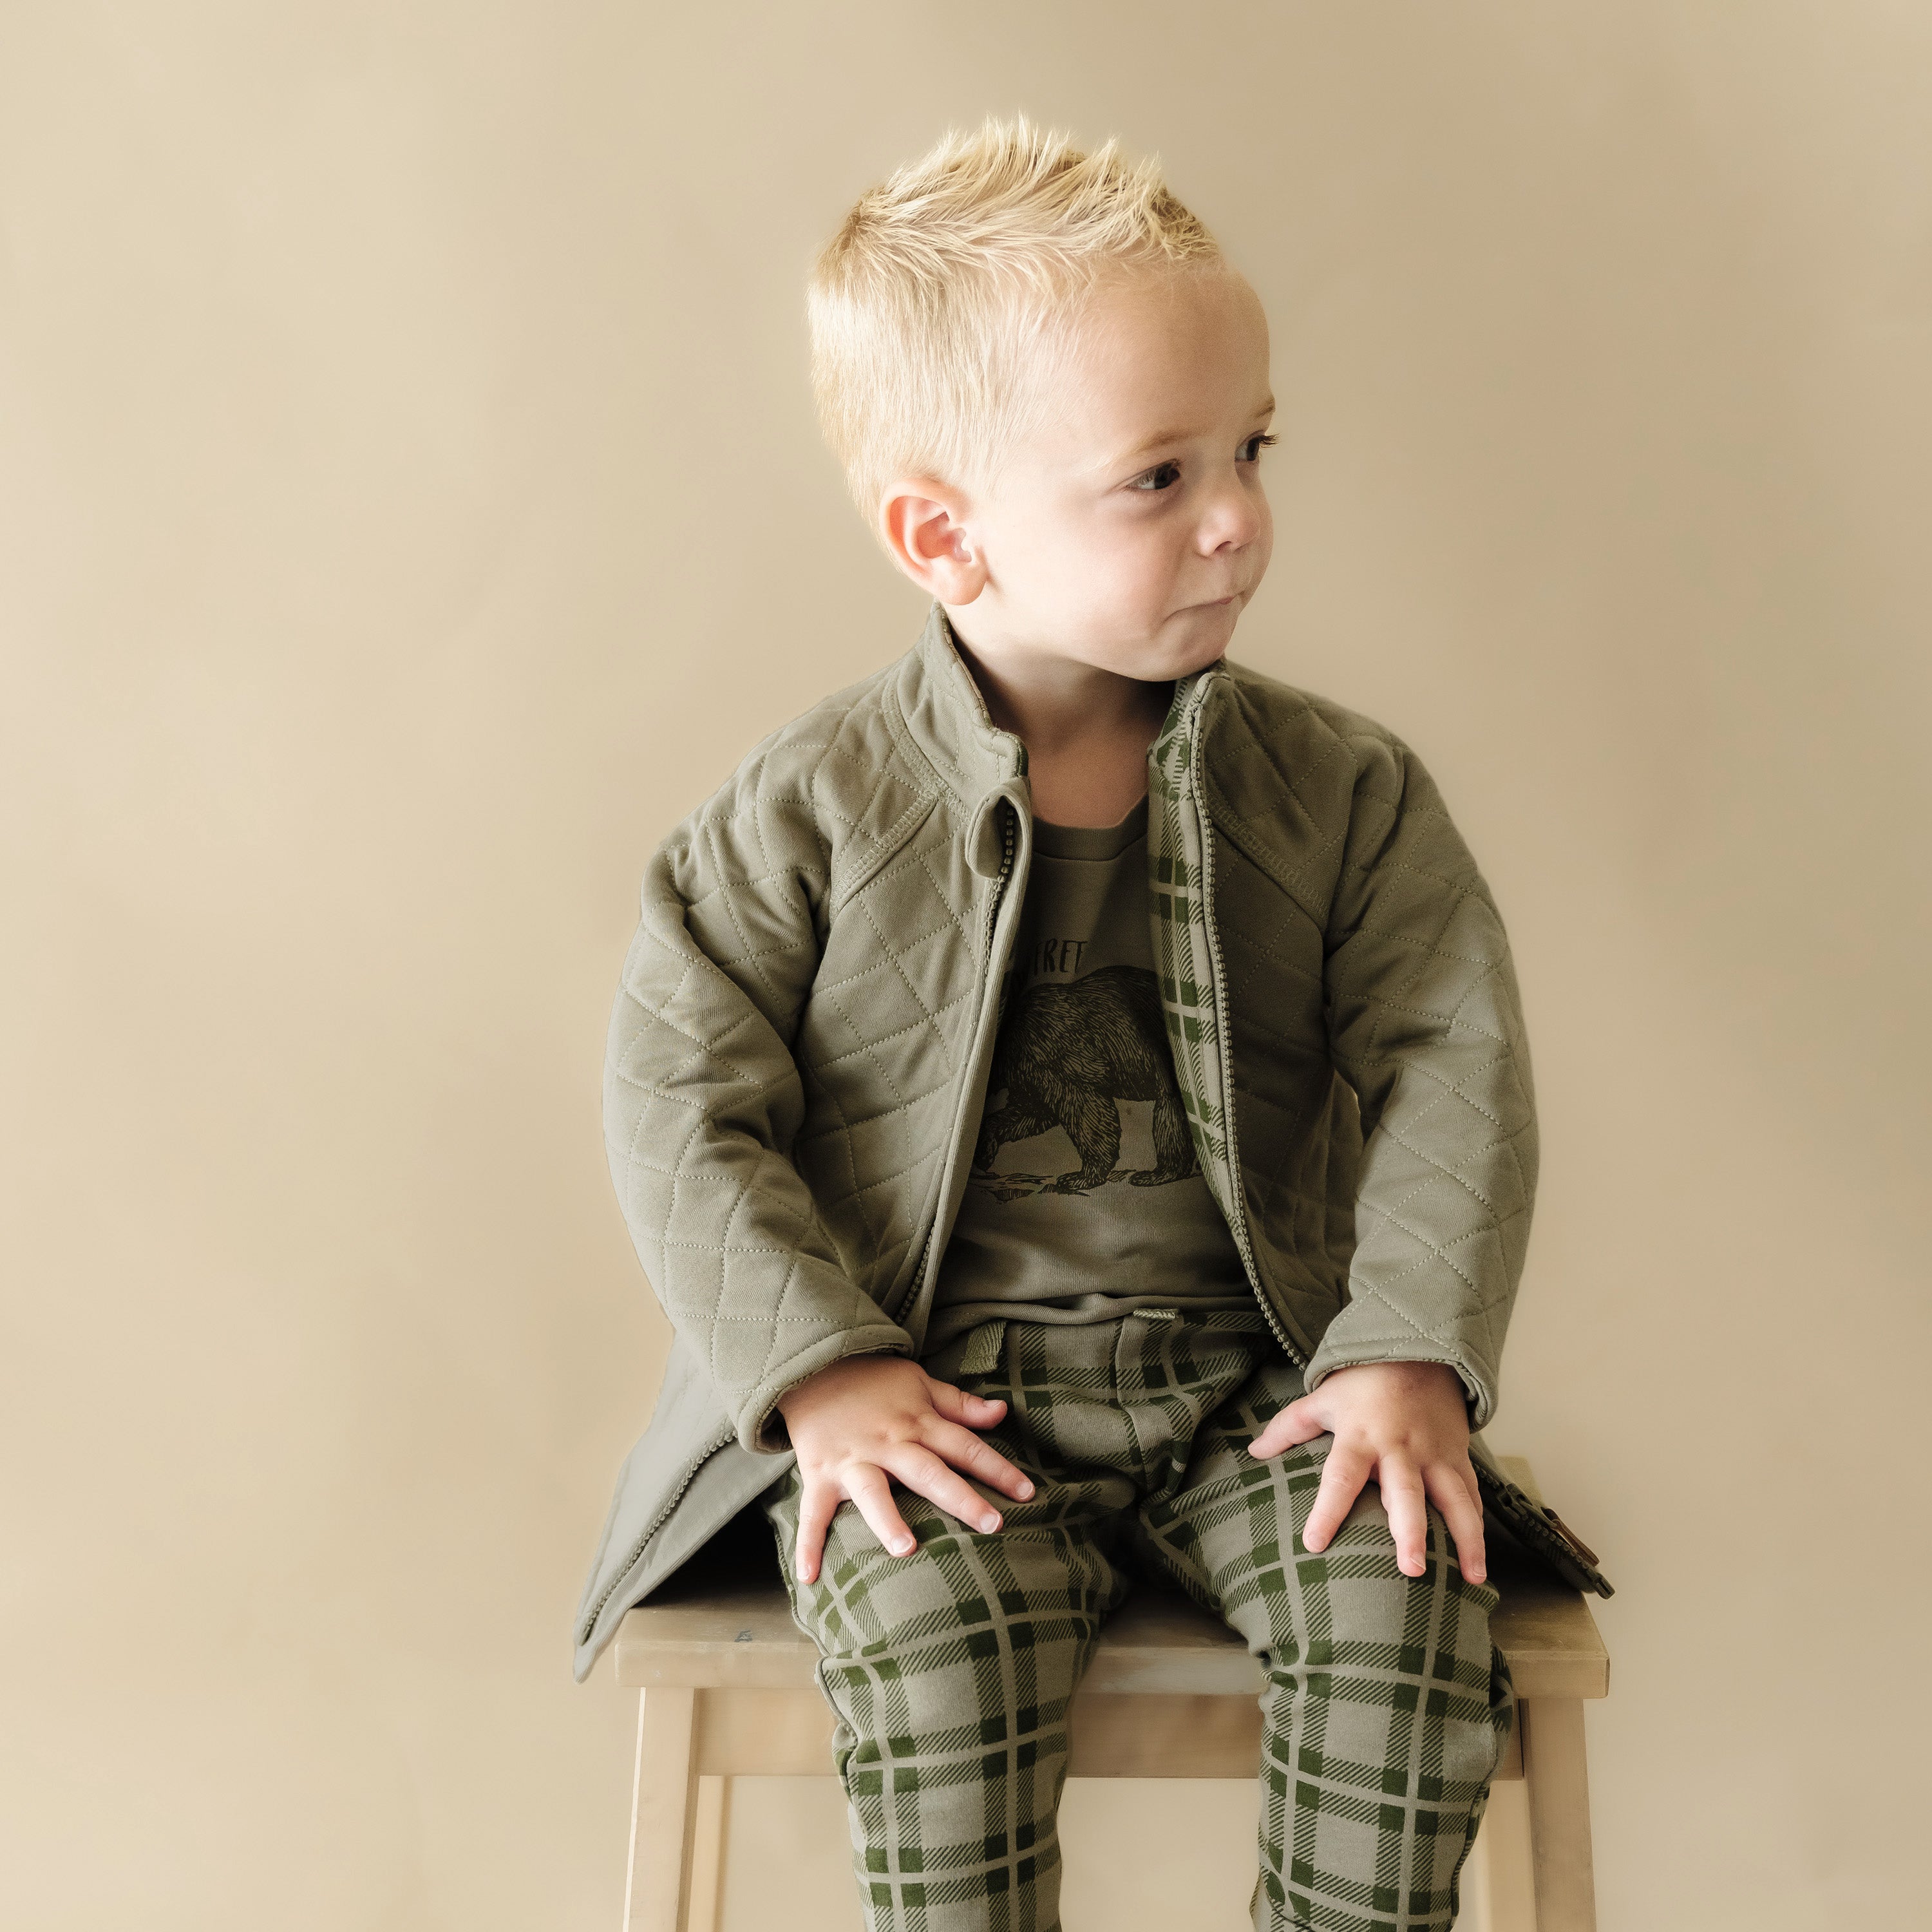 A young boy with blond hair sits on a wooden stool, stylishly dressed in Organic Kids' Organic Merino Wool Zip Jacket in Olive, camo shirt, and plaid pants, looking off to the side thoughtfully.